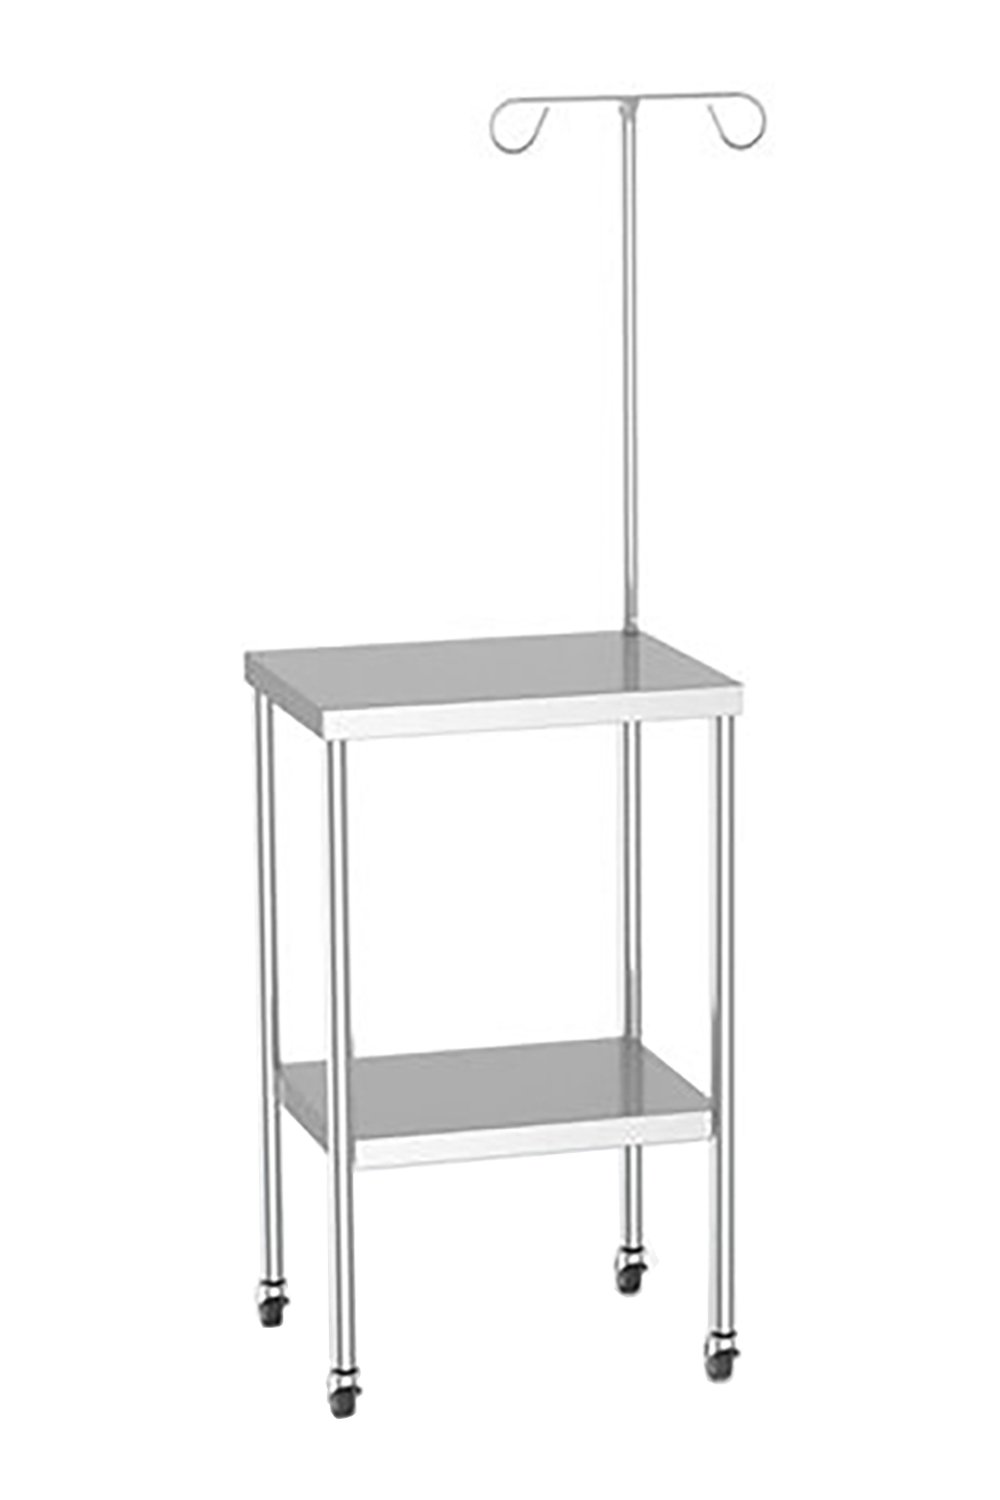 Instrument Table with undershelf, 2" Casters, Fixed height IV pole Stainless Solutions Macmedical 